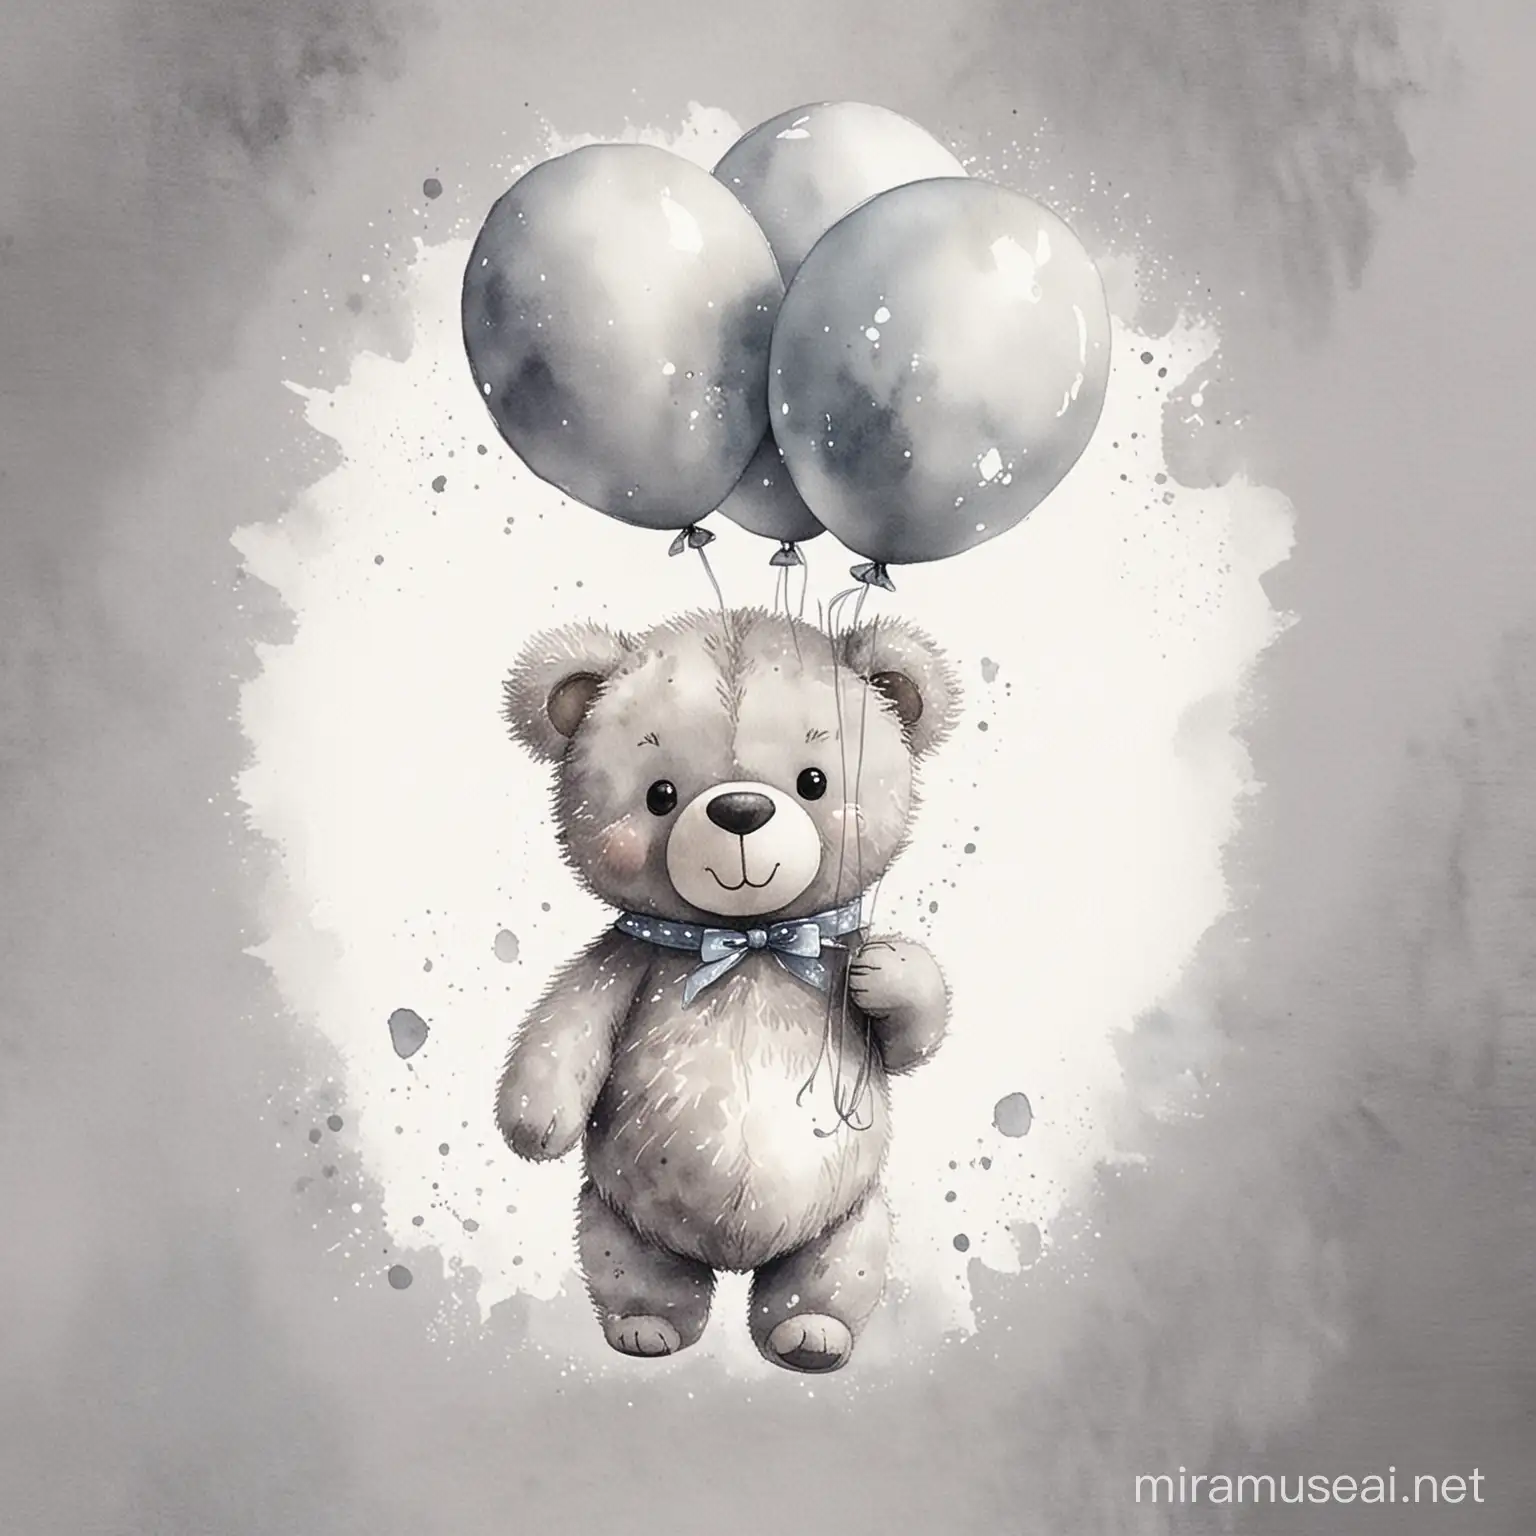 Adorable Grey Teddy Bear with Balloons in Watercolor Style